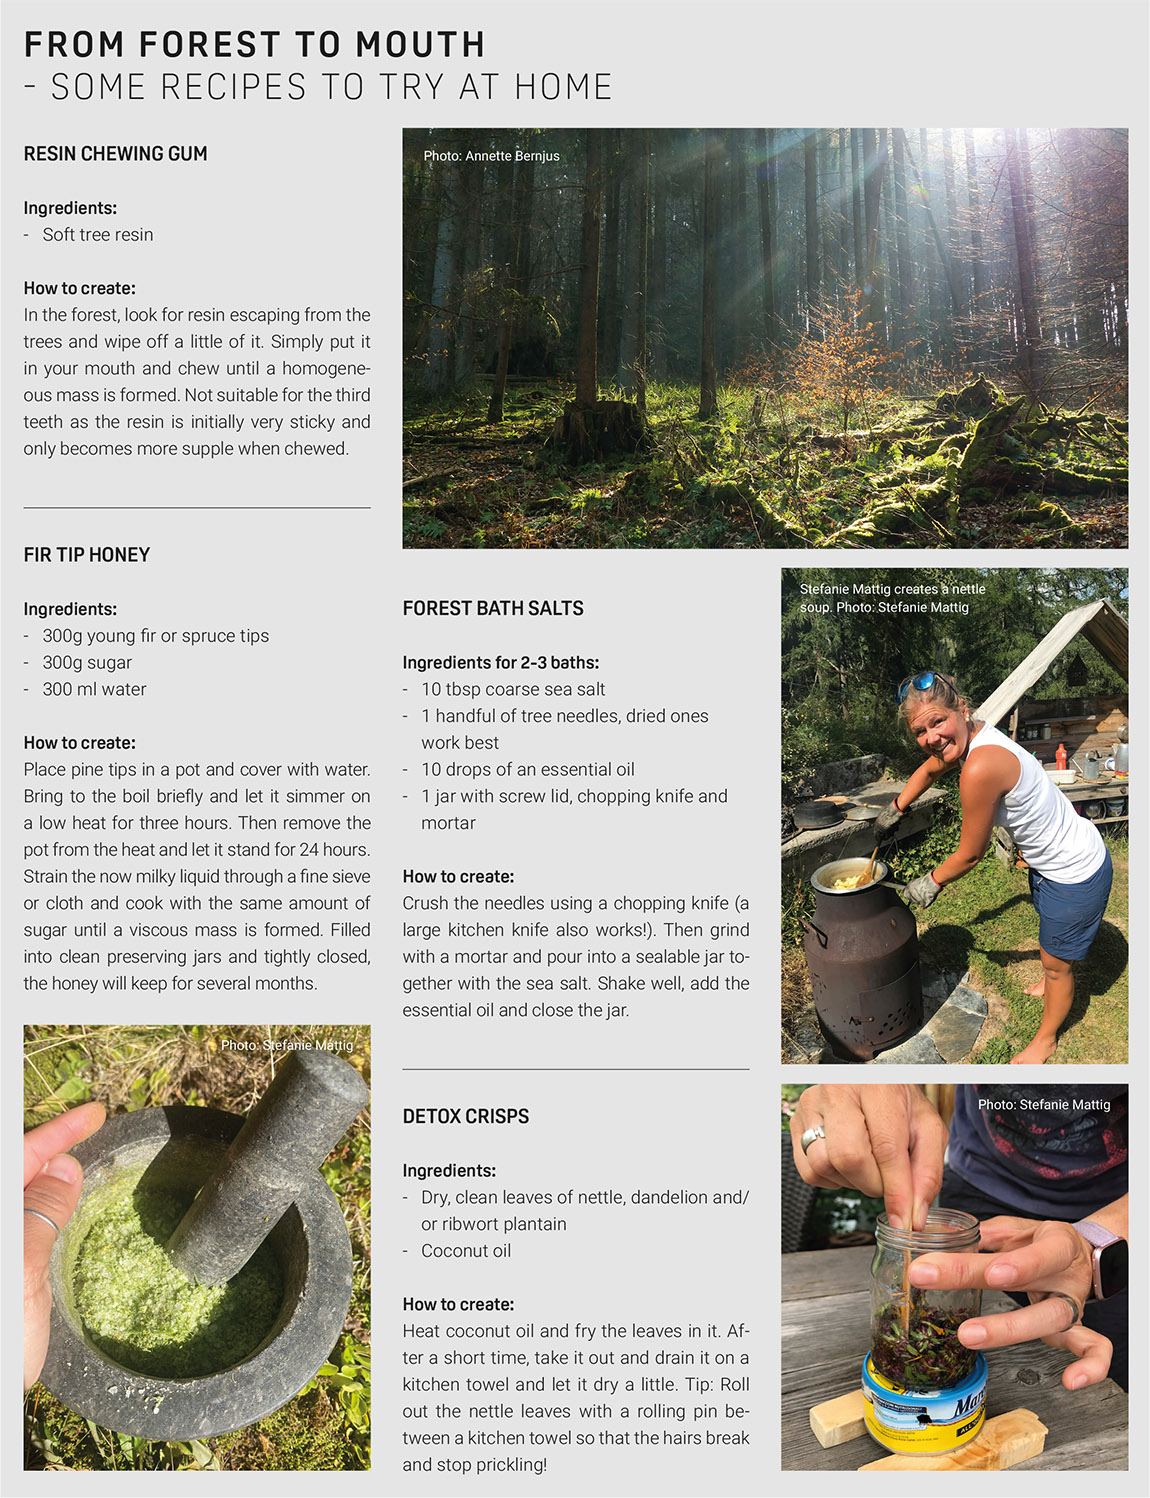 Forest Treasures: Foraging in Mountain Forests